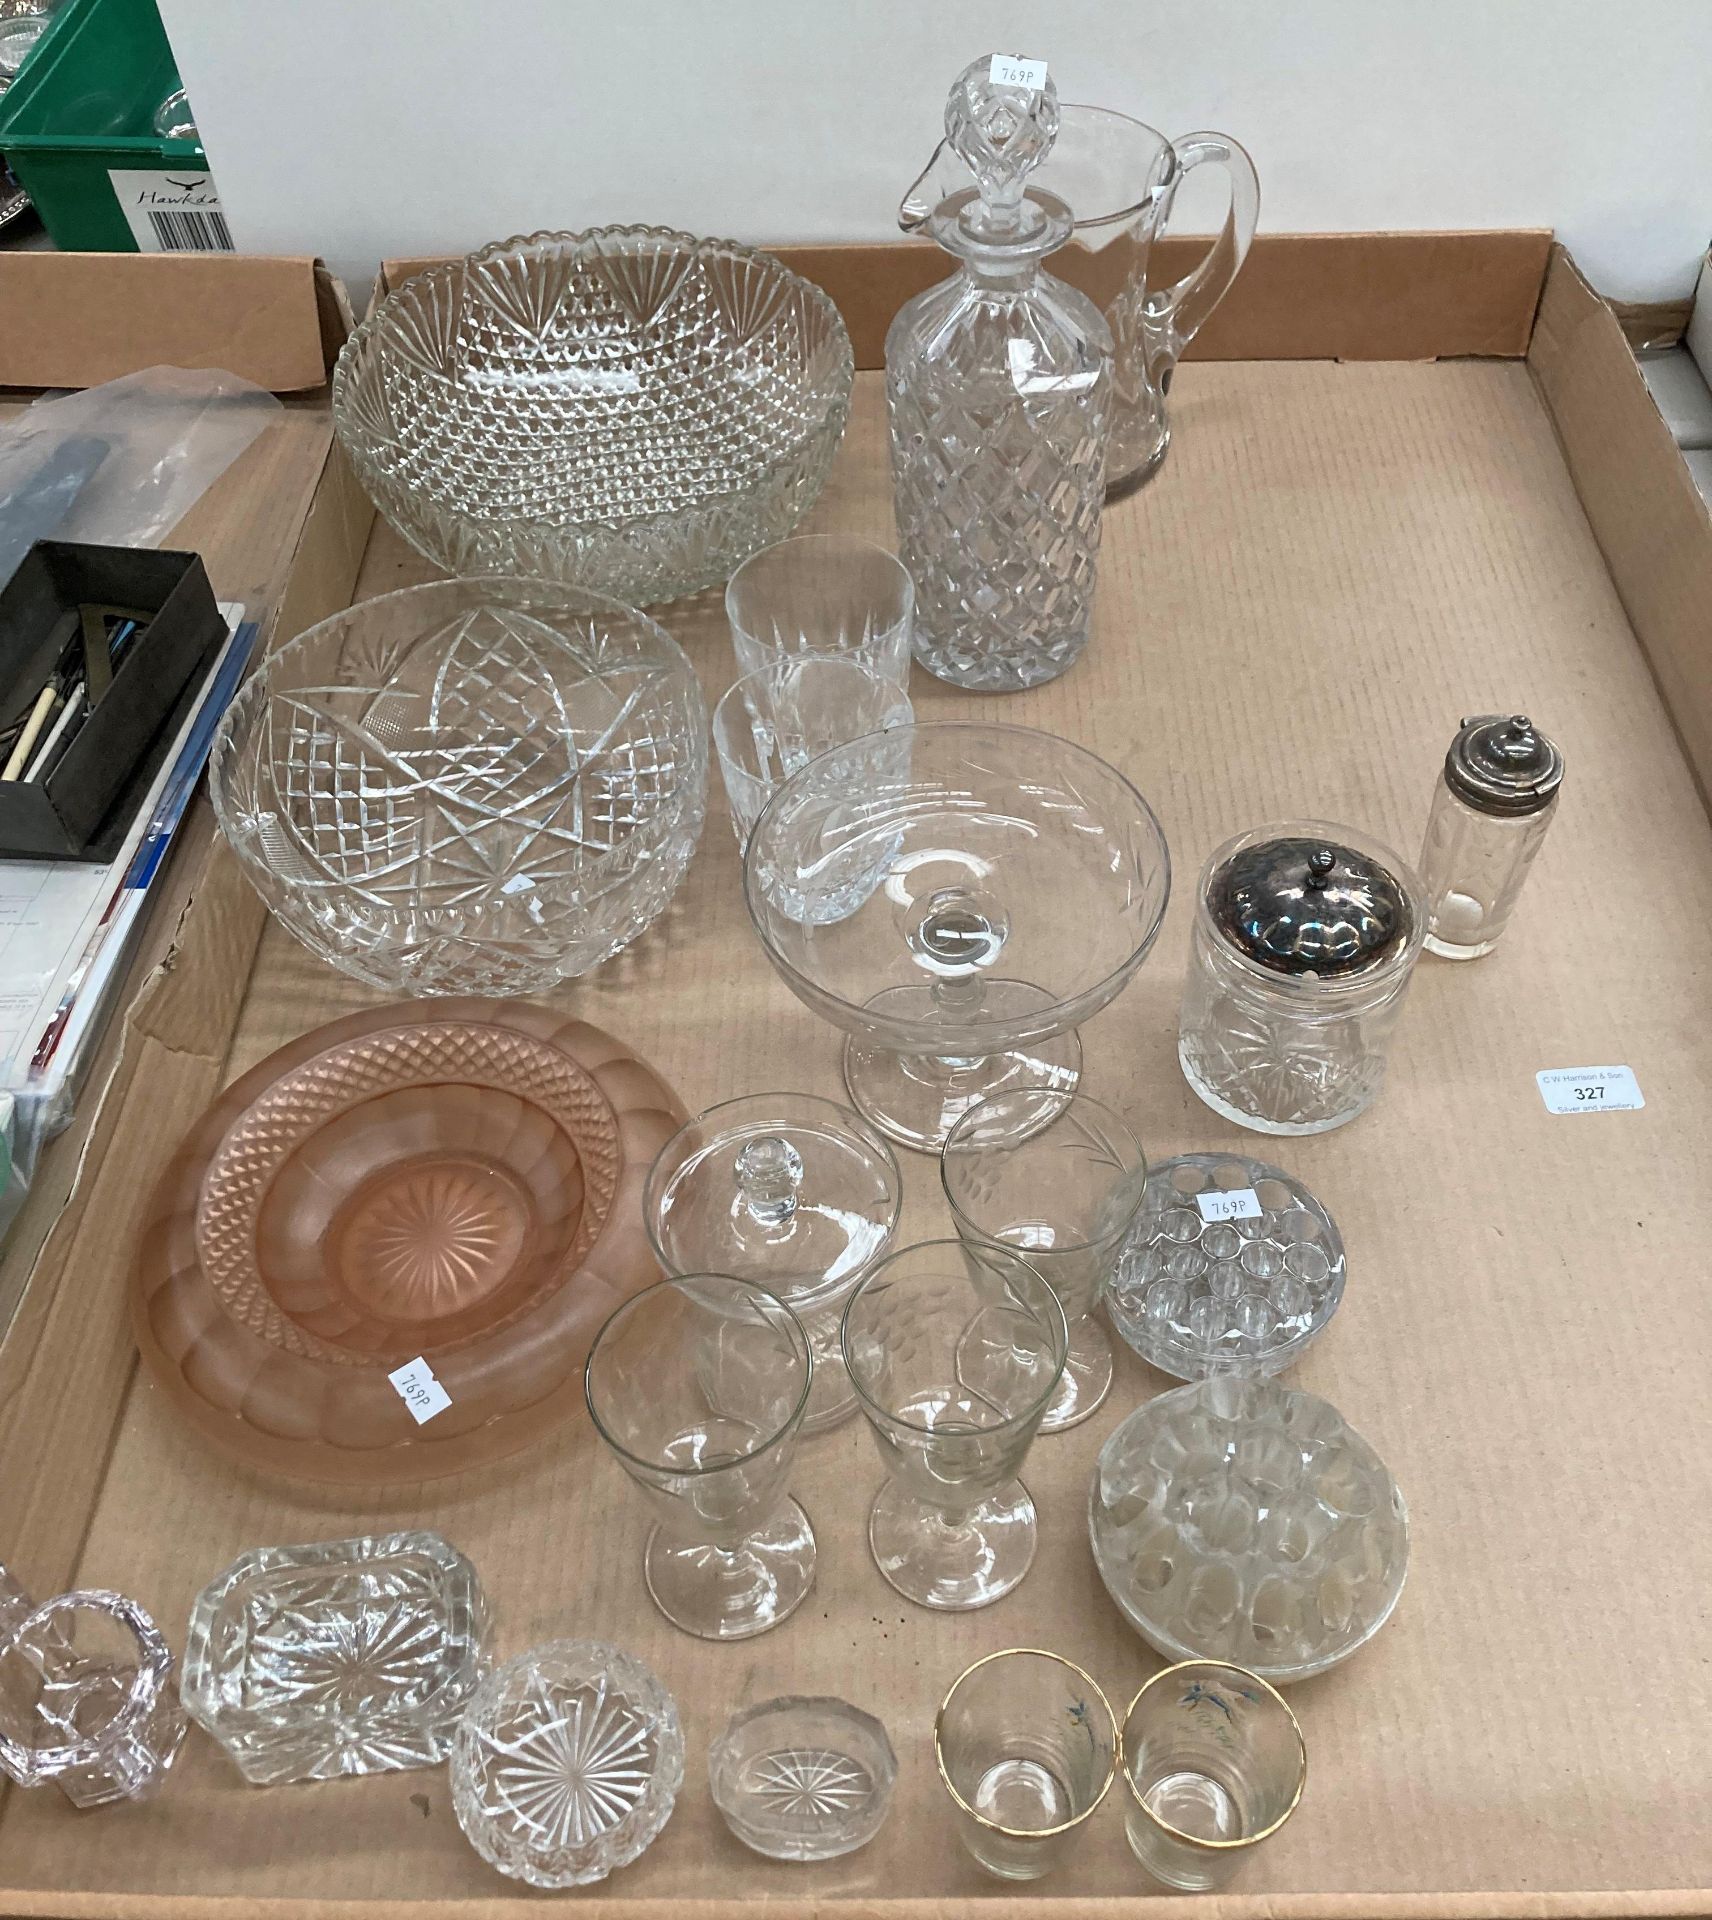 Contents to tray - assorted glassware (22 pieces) including decanter, bowls, jug,